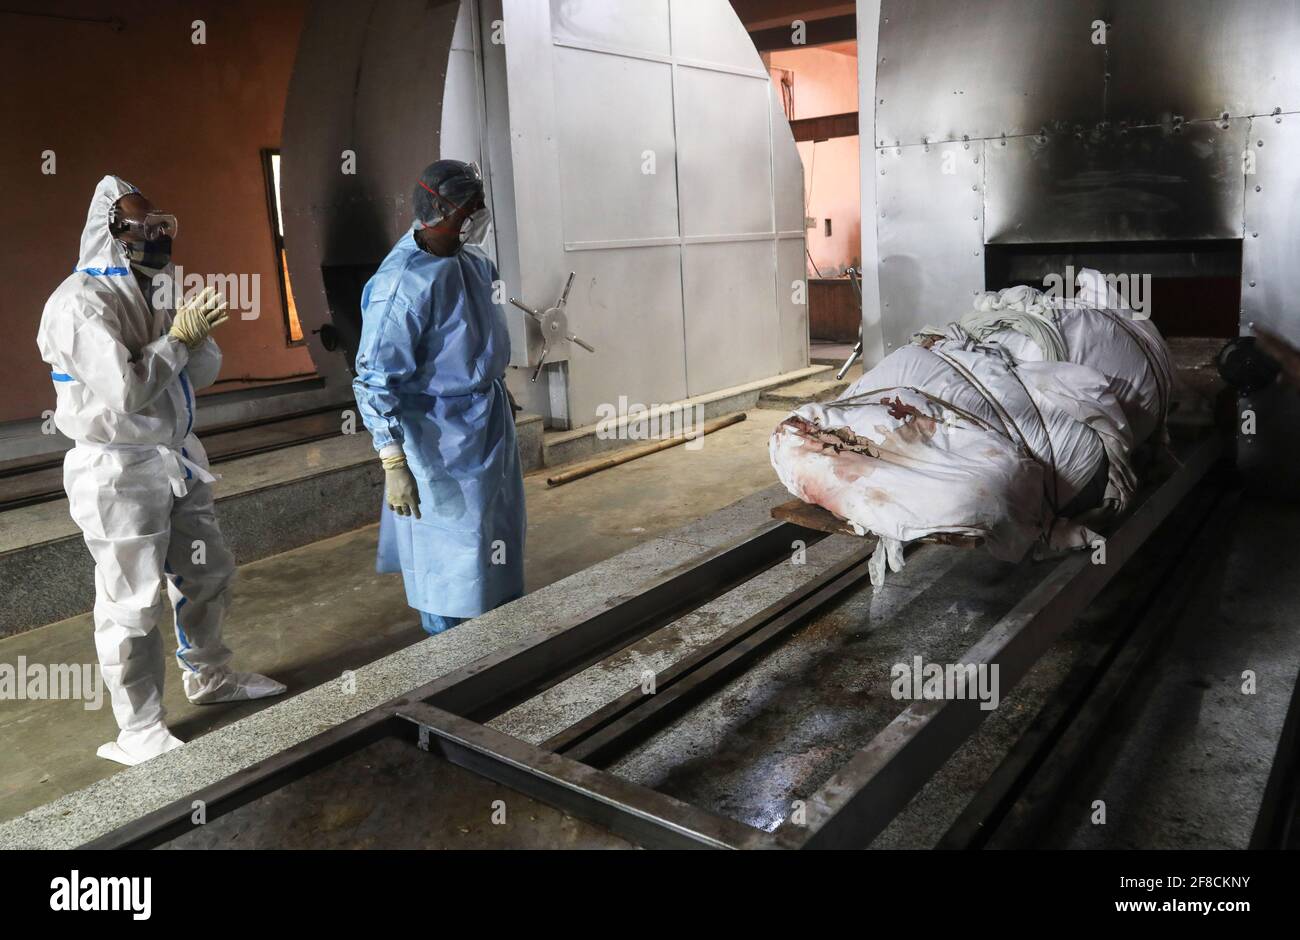 (EDITORS NOTE: Image depicts death) Relatives of COVID victims pay their last respect before cremation in a CNG furnace at Nigambodh Ghat crematorium in New Delhi. India recorded 161,736 new Covid-19 cases and 879 deaths in the last 24 hours. (Photo by Naveen Sharma / SOPA Images/Sipa USA) Stock Photo